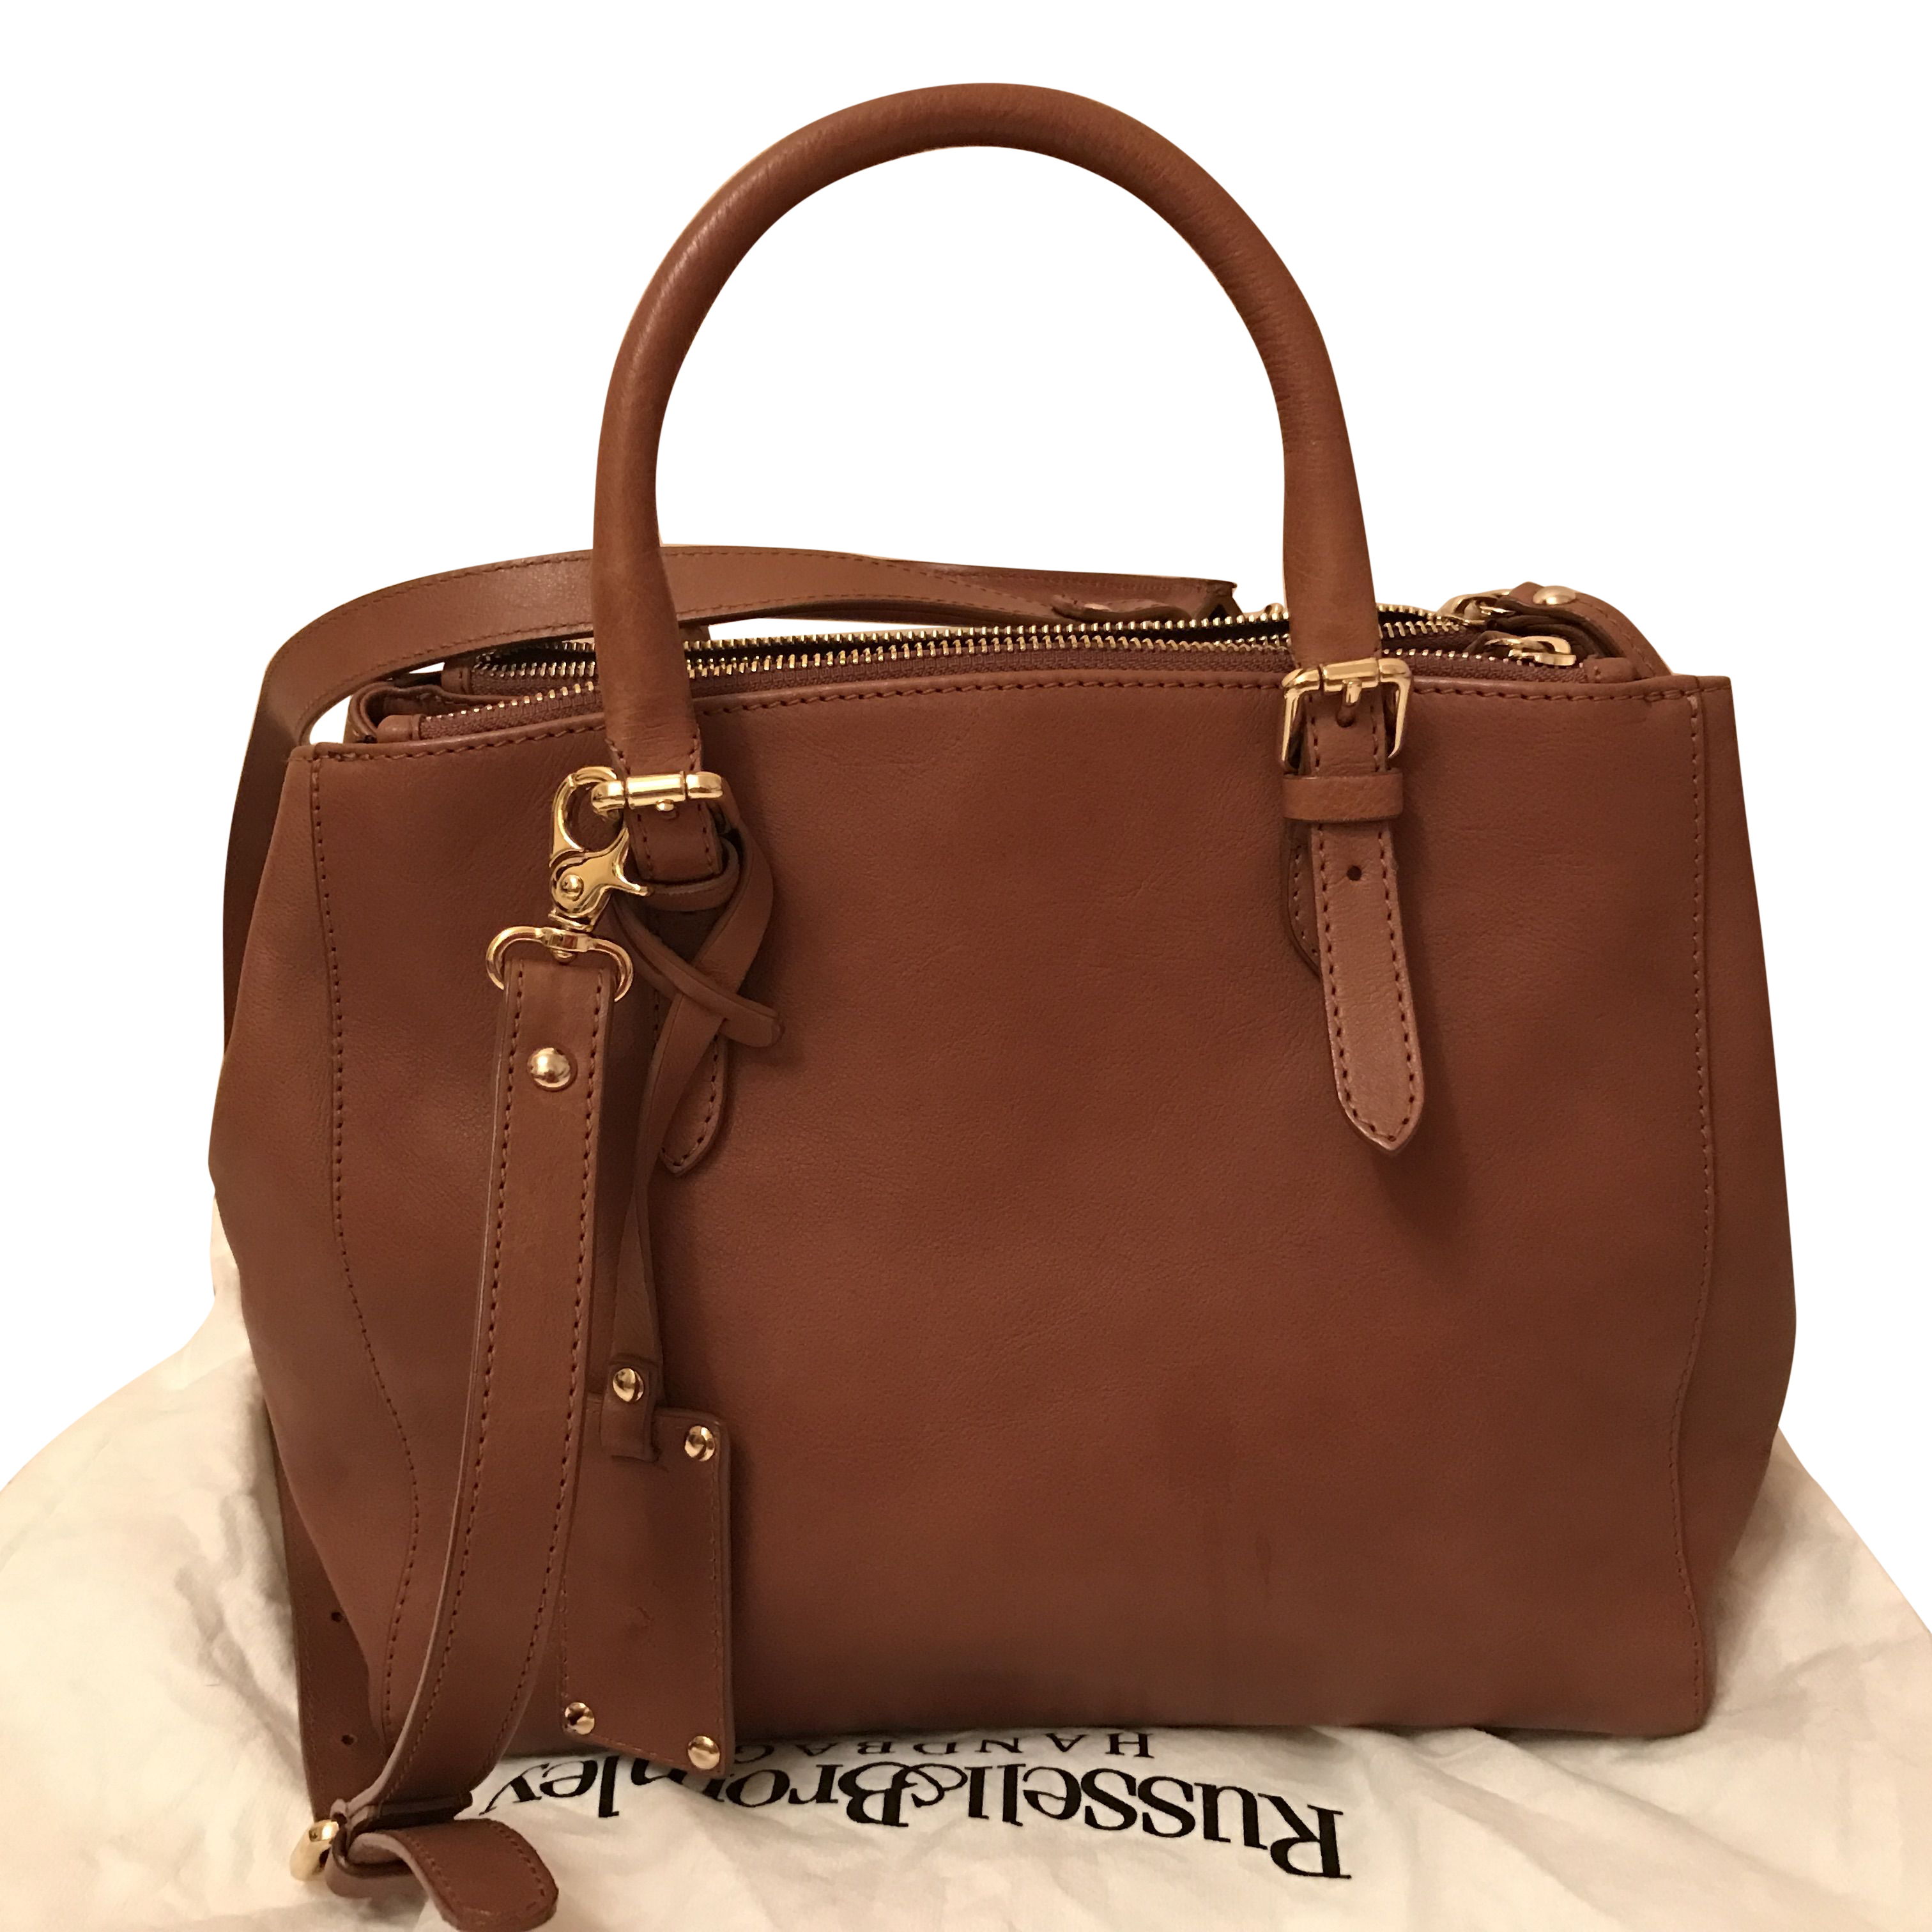 russell and bromley tote bags